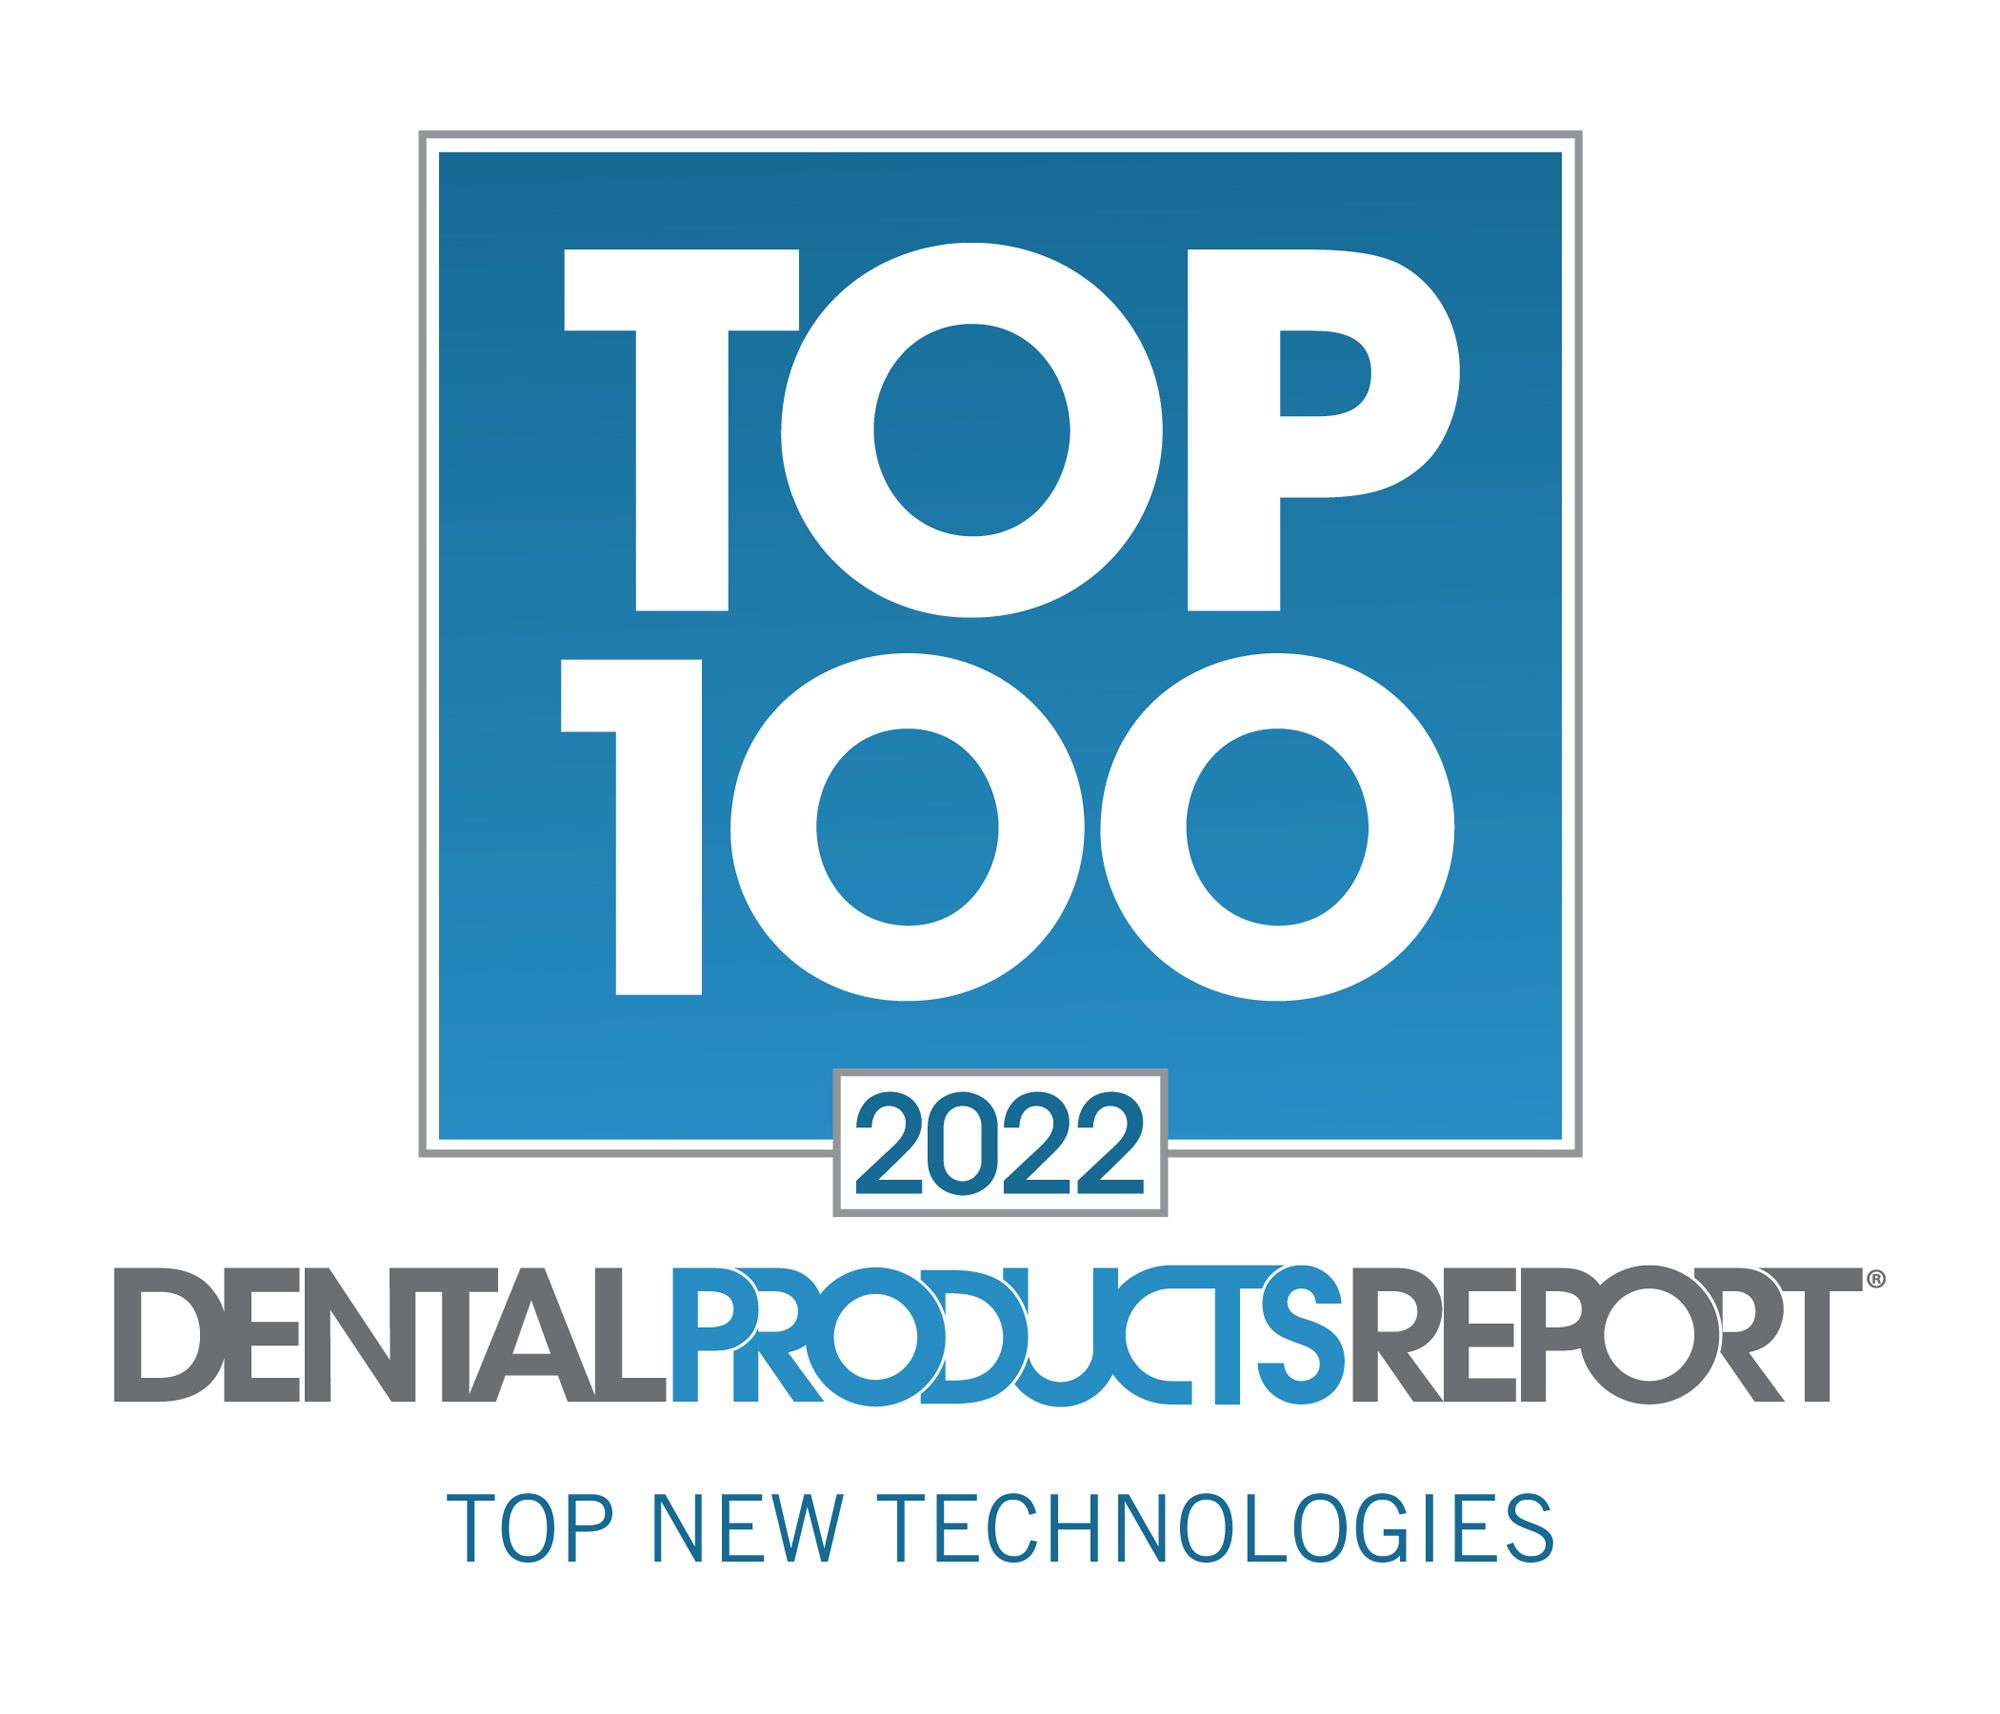 Top 10 New Dental Technologies of 2022